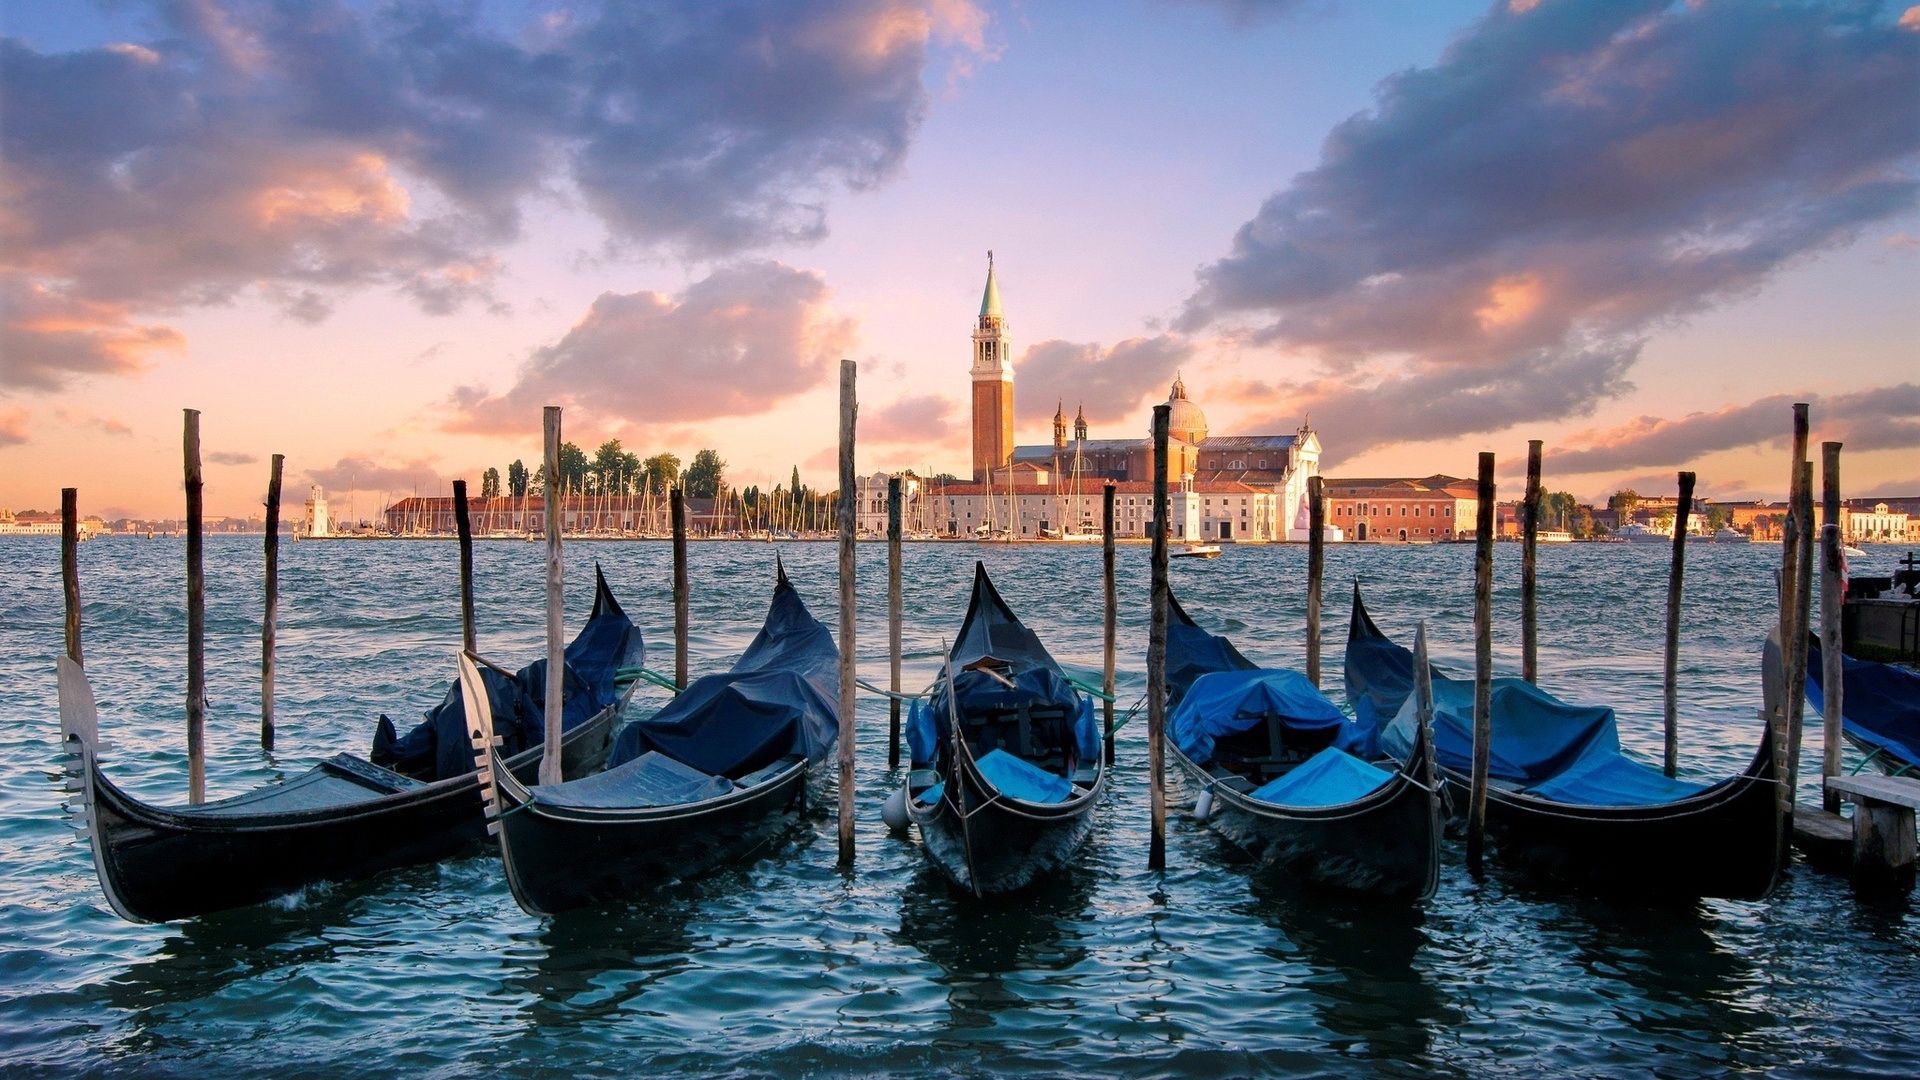 77 Venice HD Wallpapers | Backgrounds - Wallpaper Abyss